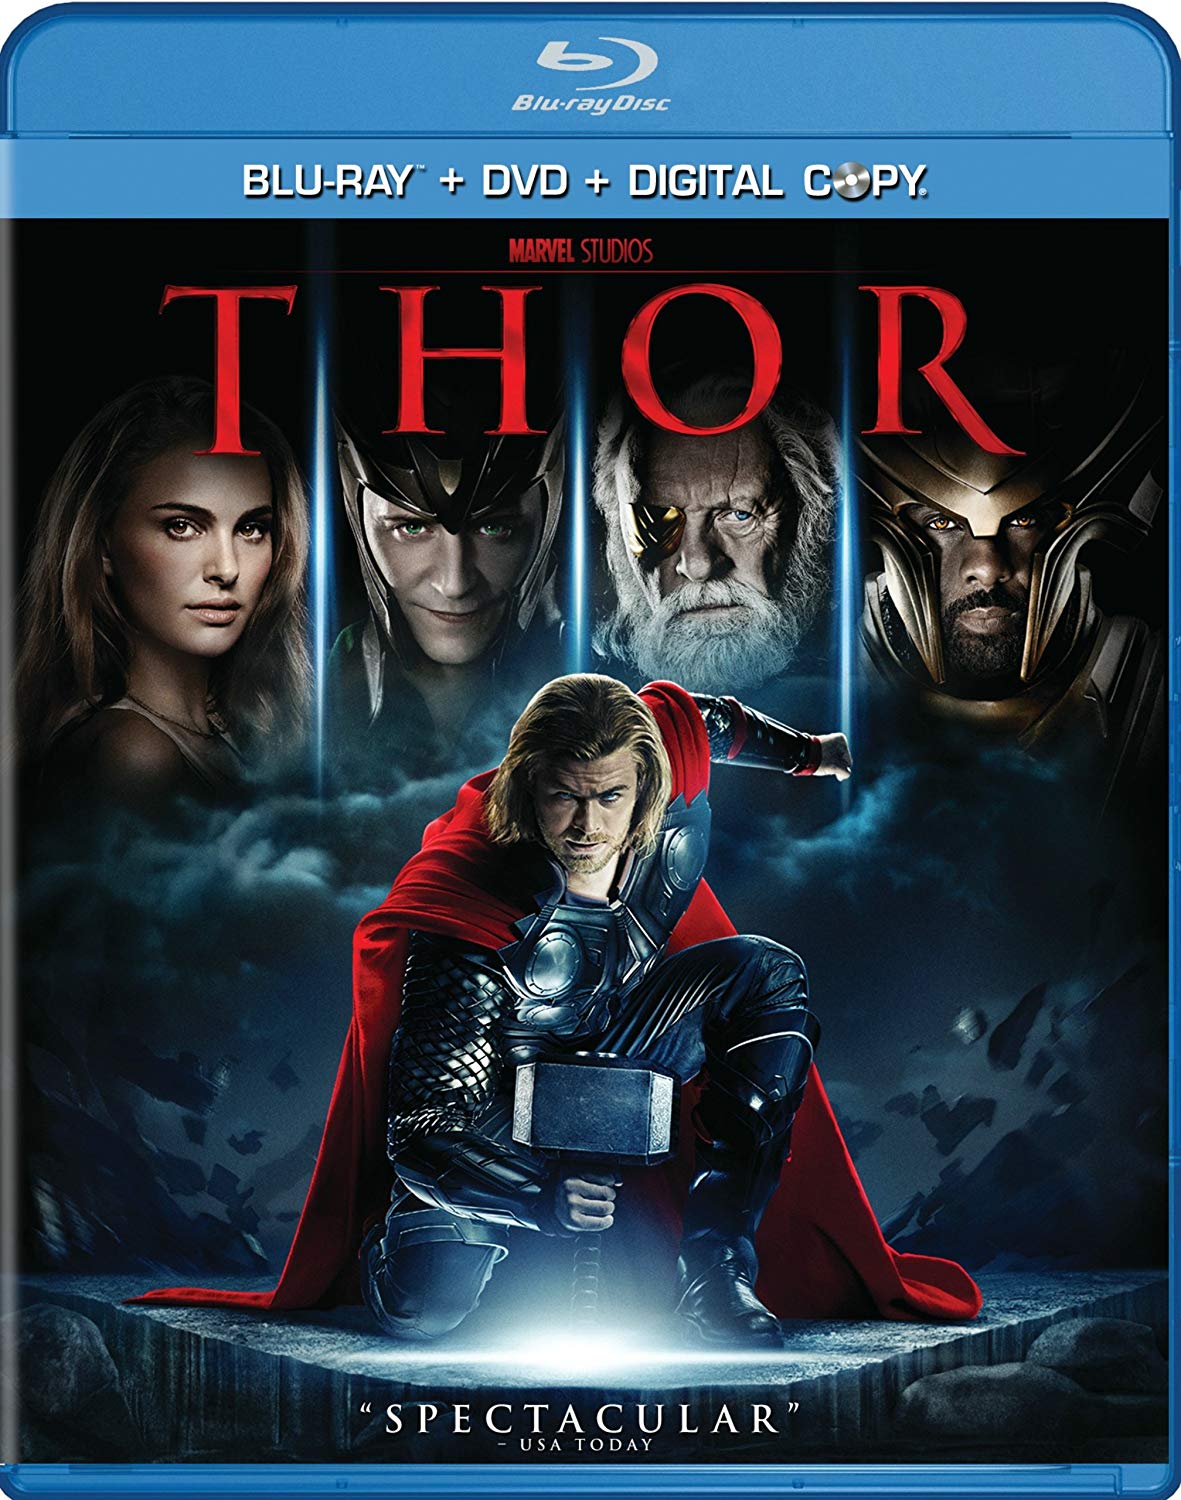 The Thor Trilogy